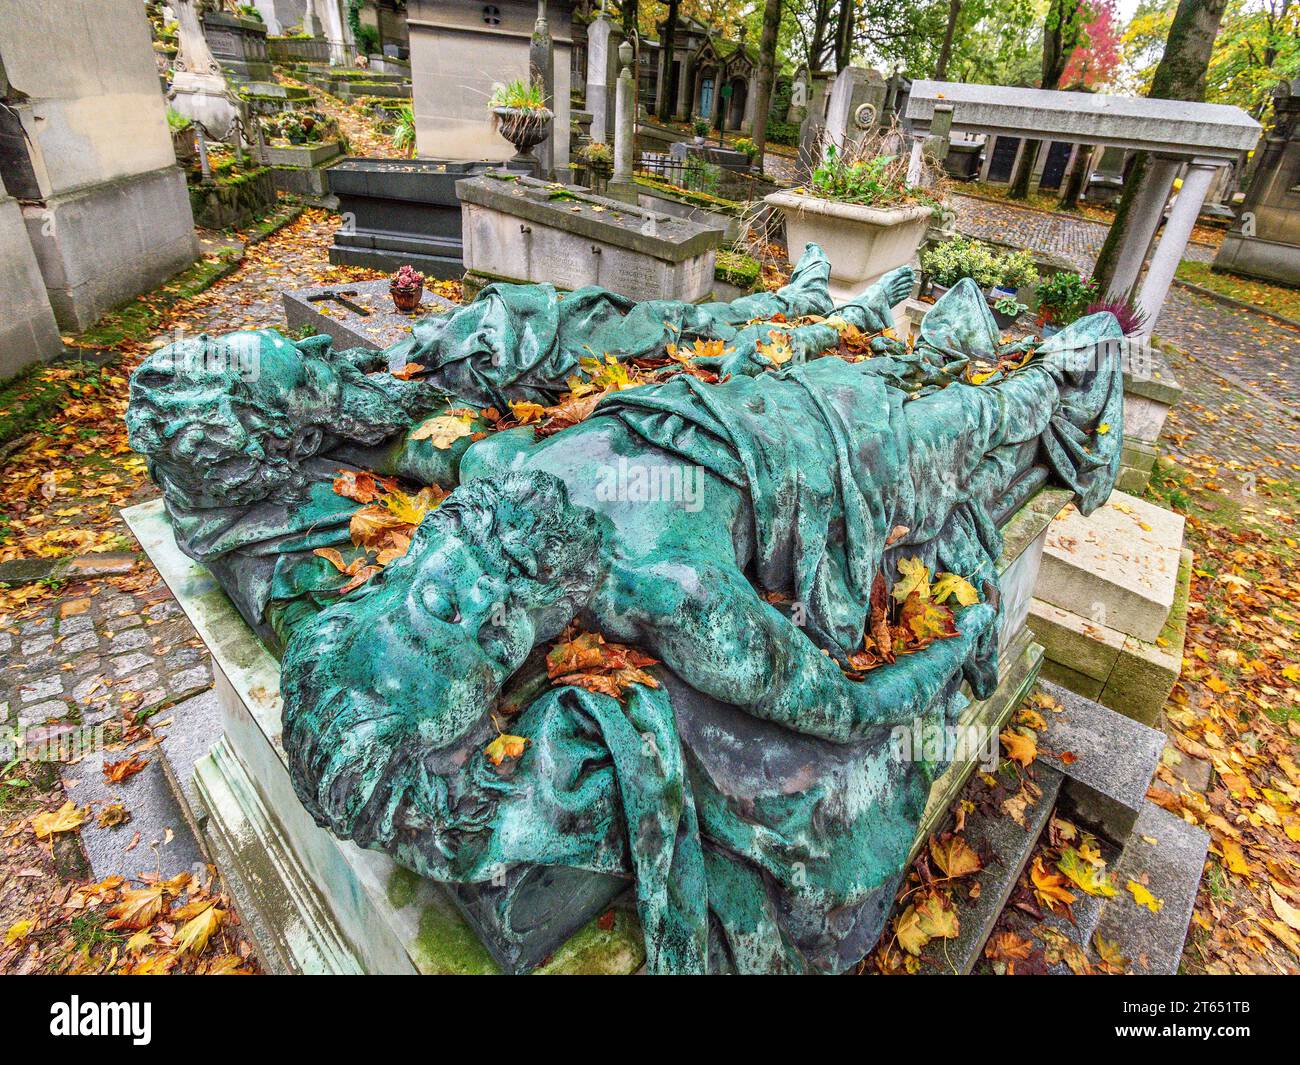 Graves and monument to balloonists Spinelli and Sivel (who died at 8,600 meters altitude) in the Père Lachaise cemetery, Paris 20, France. Stock Photo